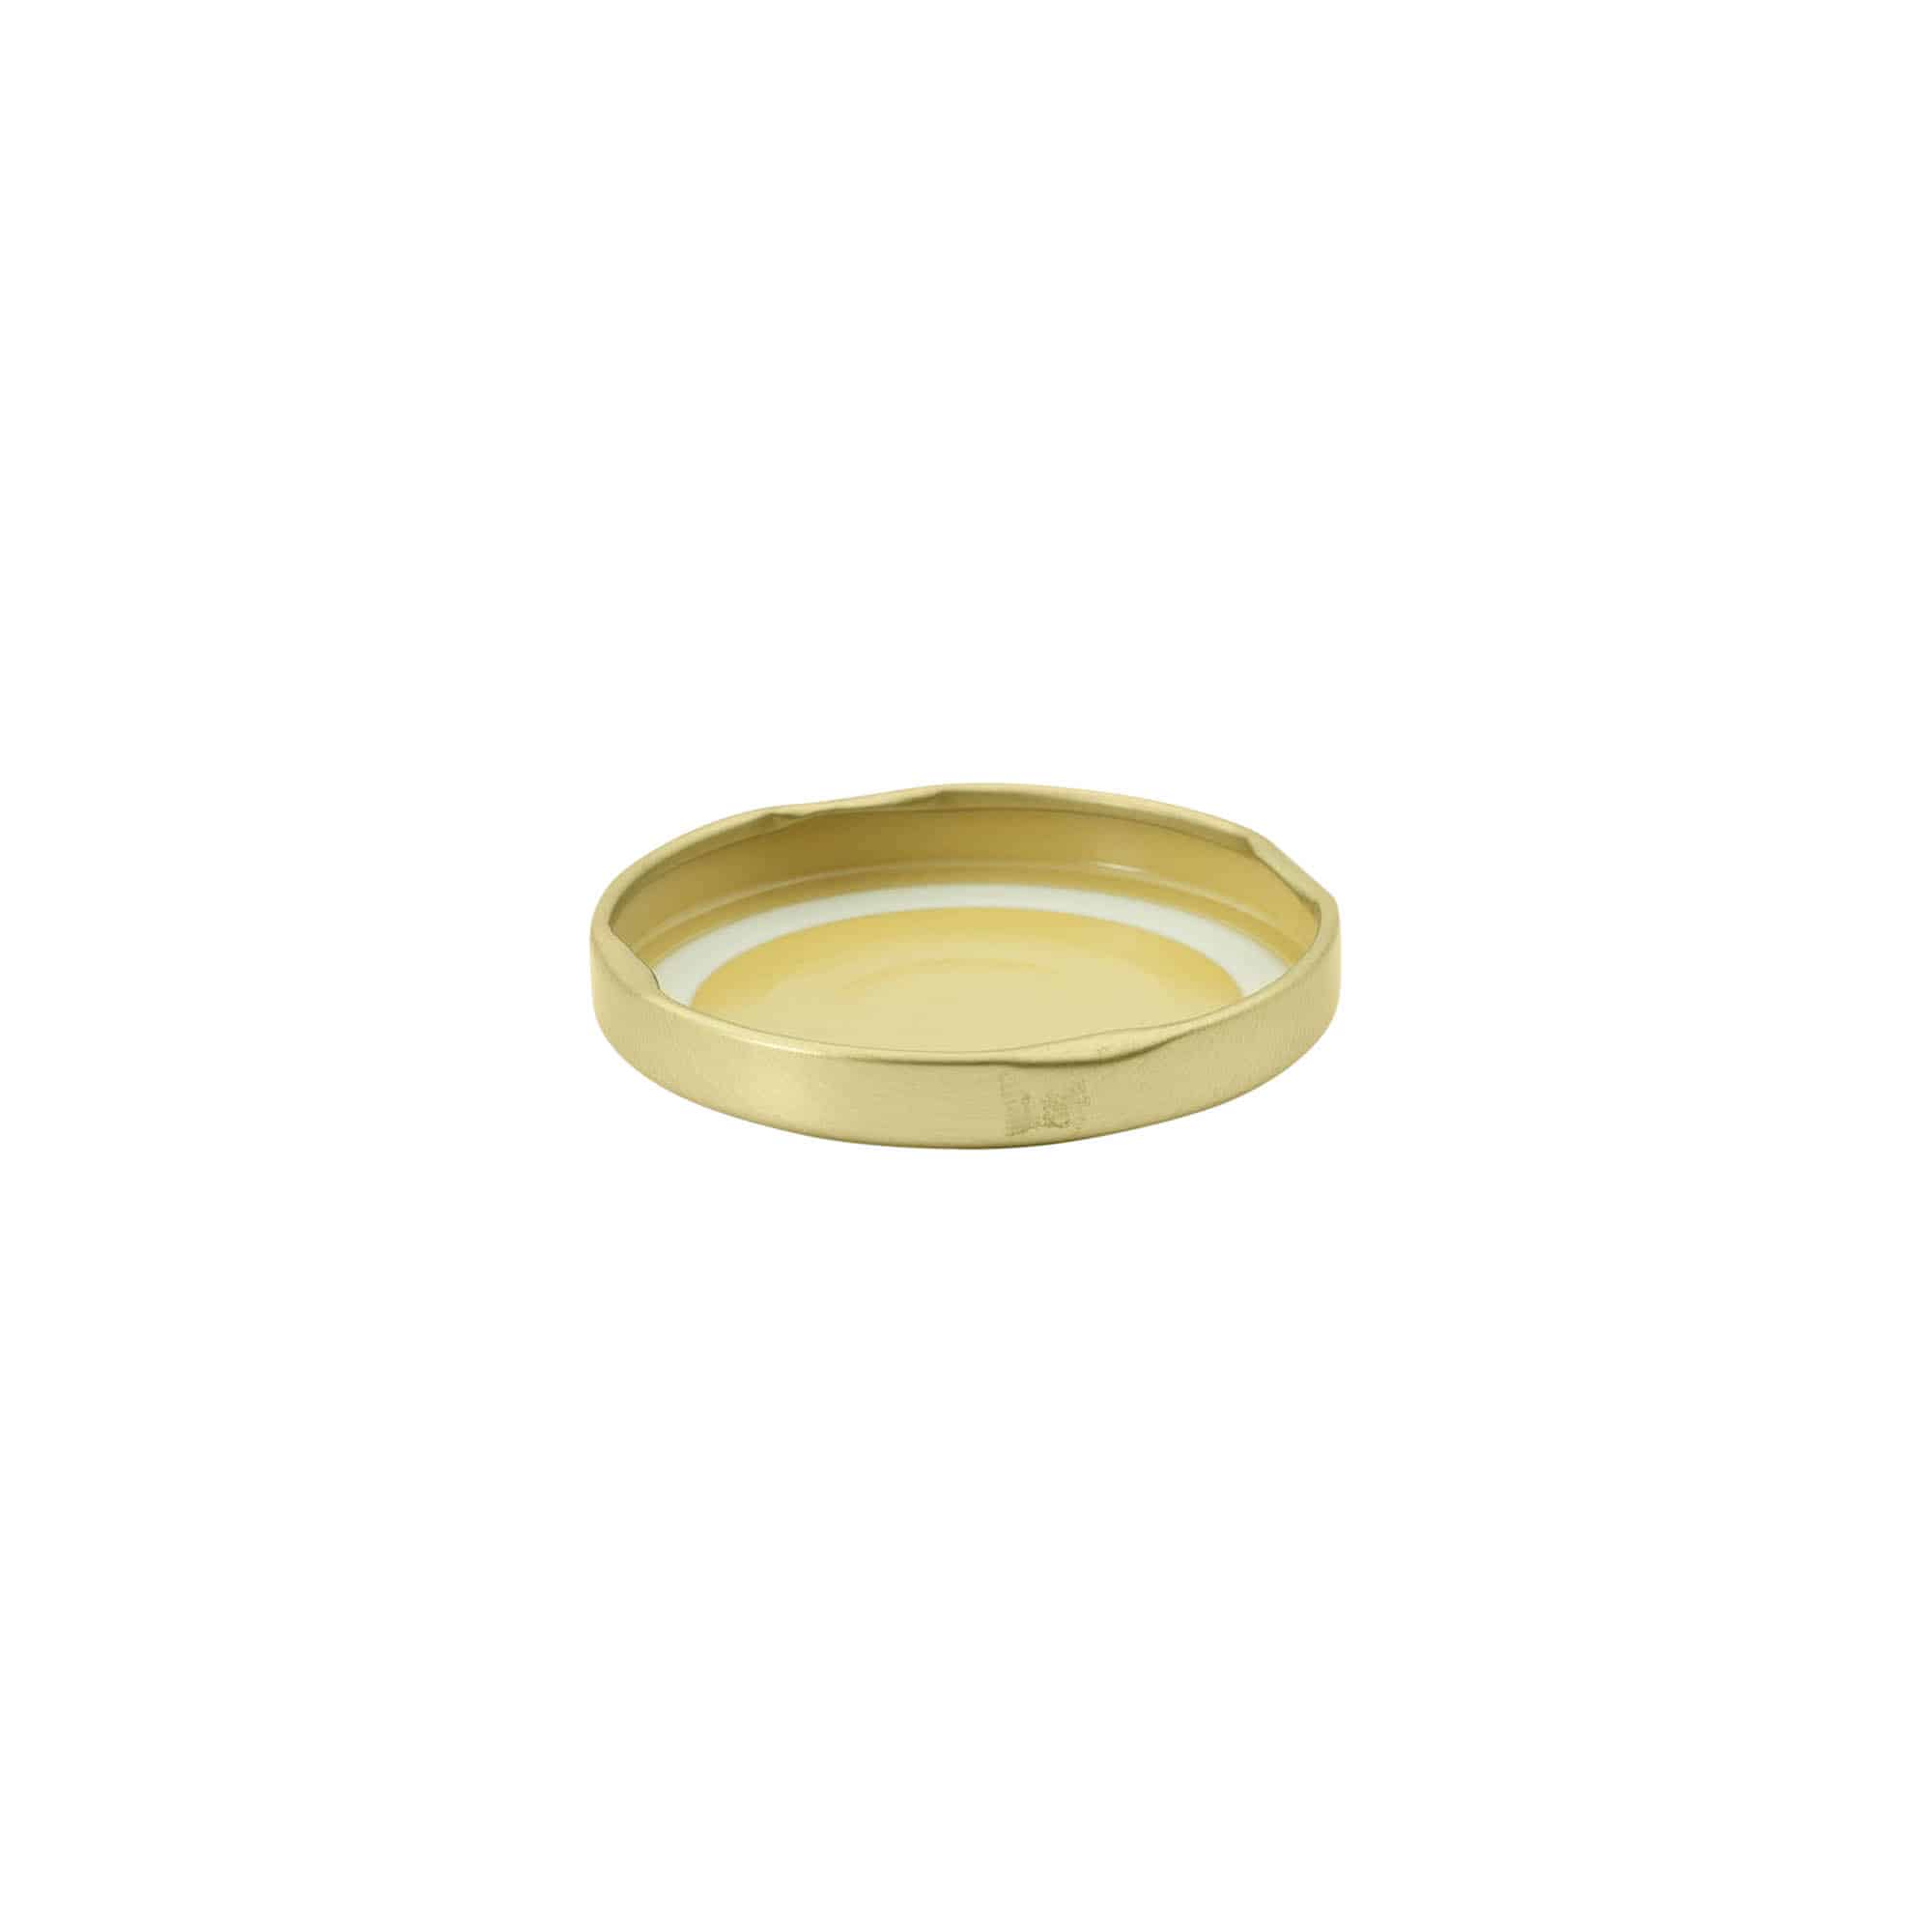 Twist off lid, tinplate, gold, for opening: TO 58